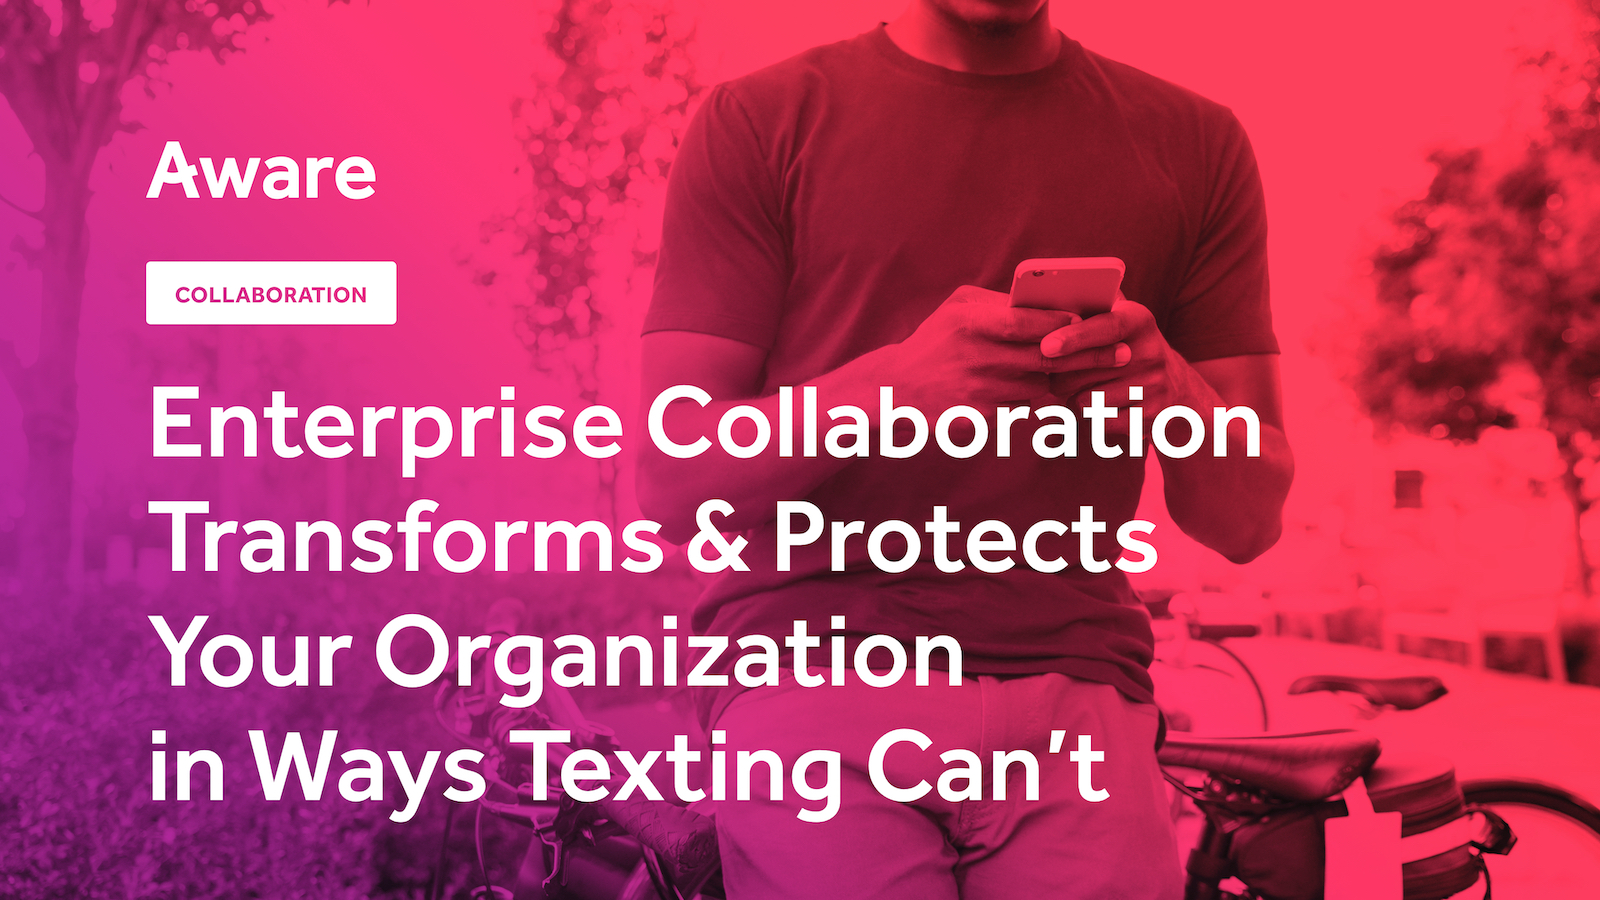 Enterprise Collaboration Transforms & Protects in Ways Texting Can’t